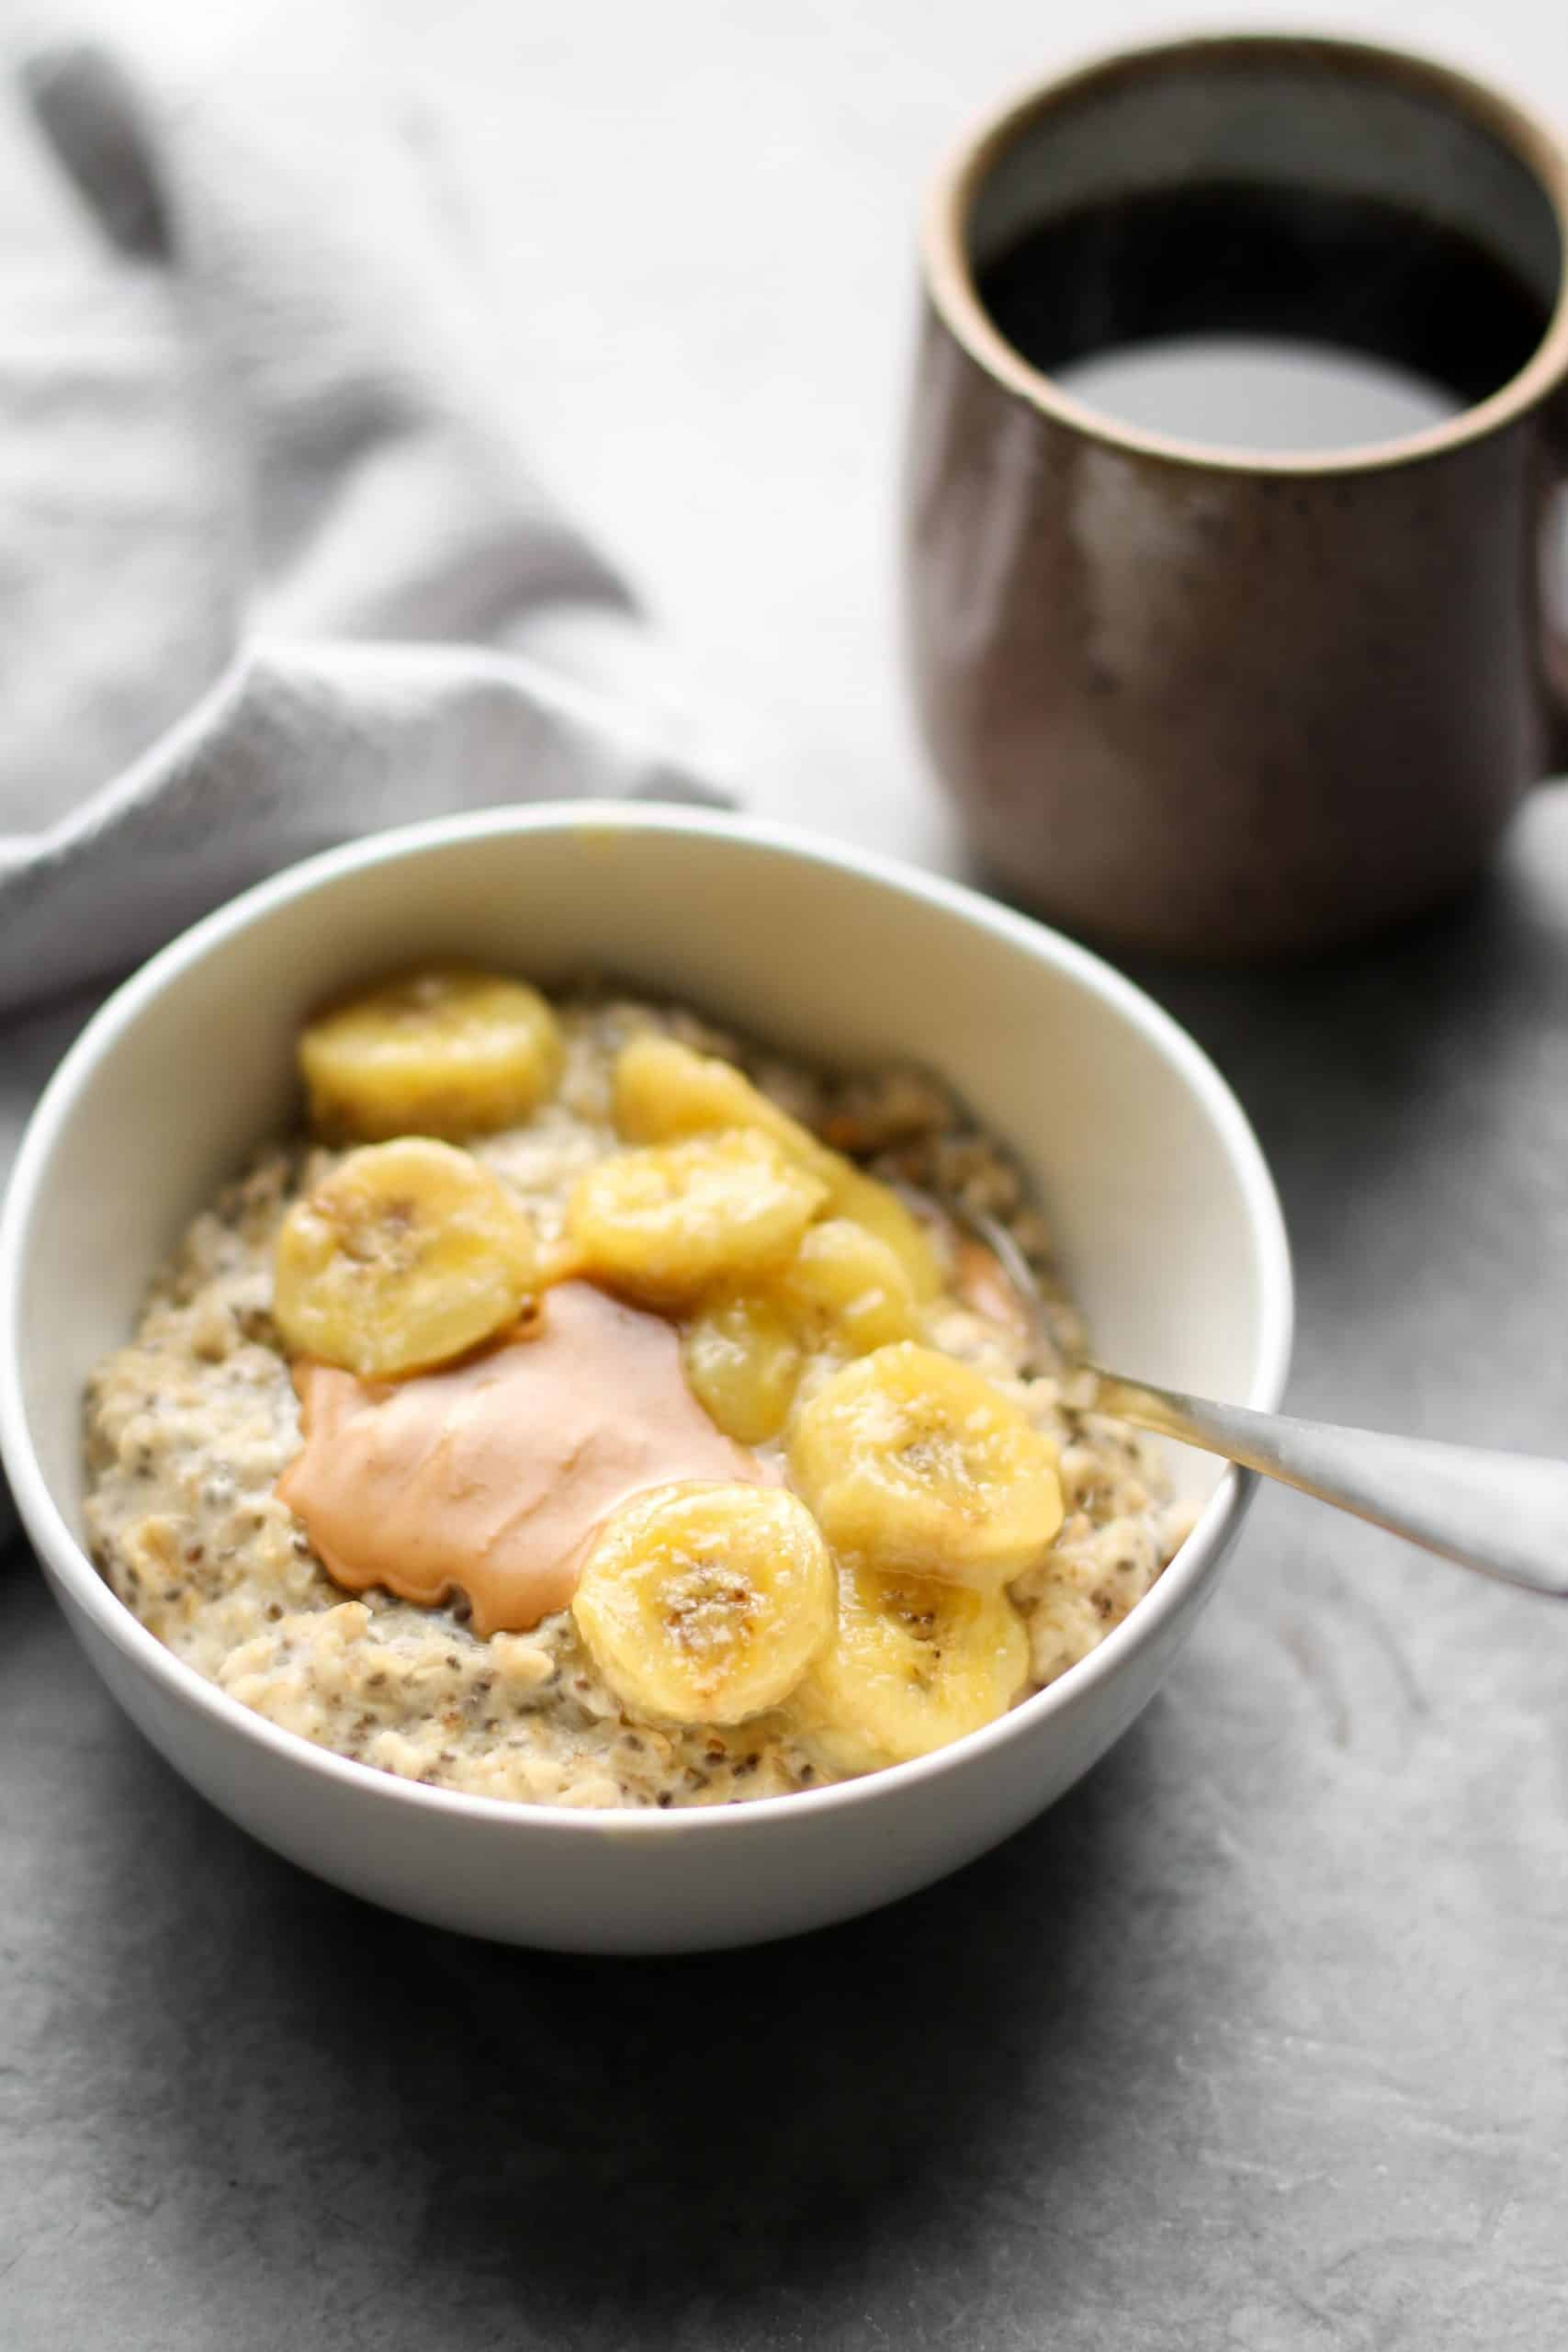 Caramelized bananas with oatmeal in a bowl